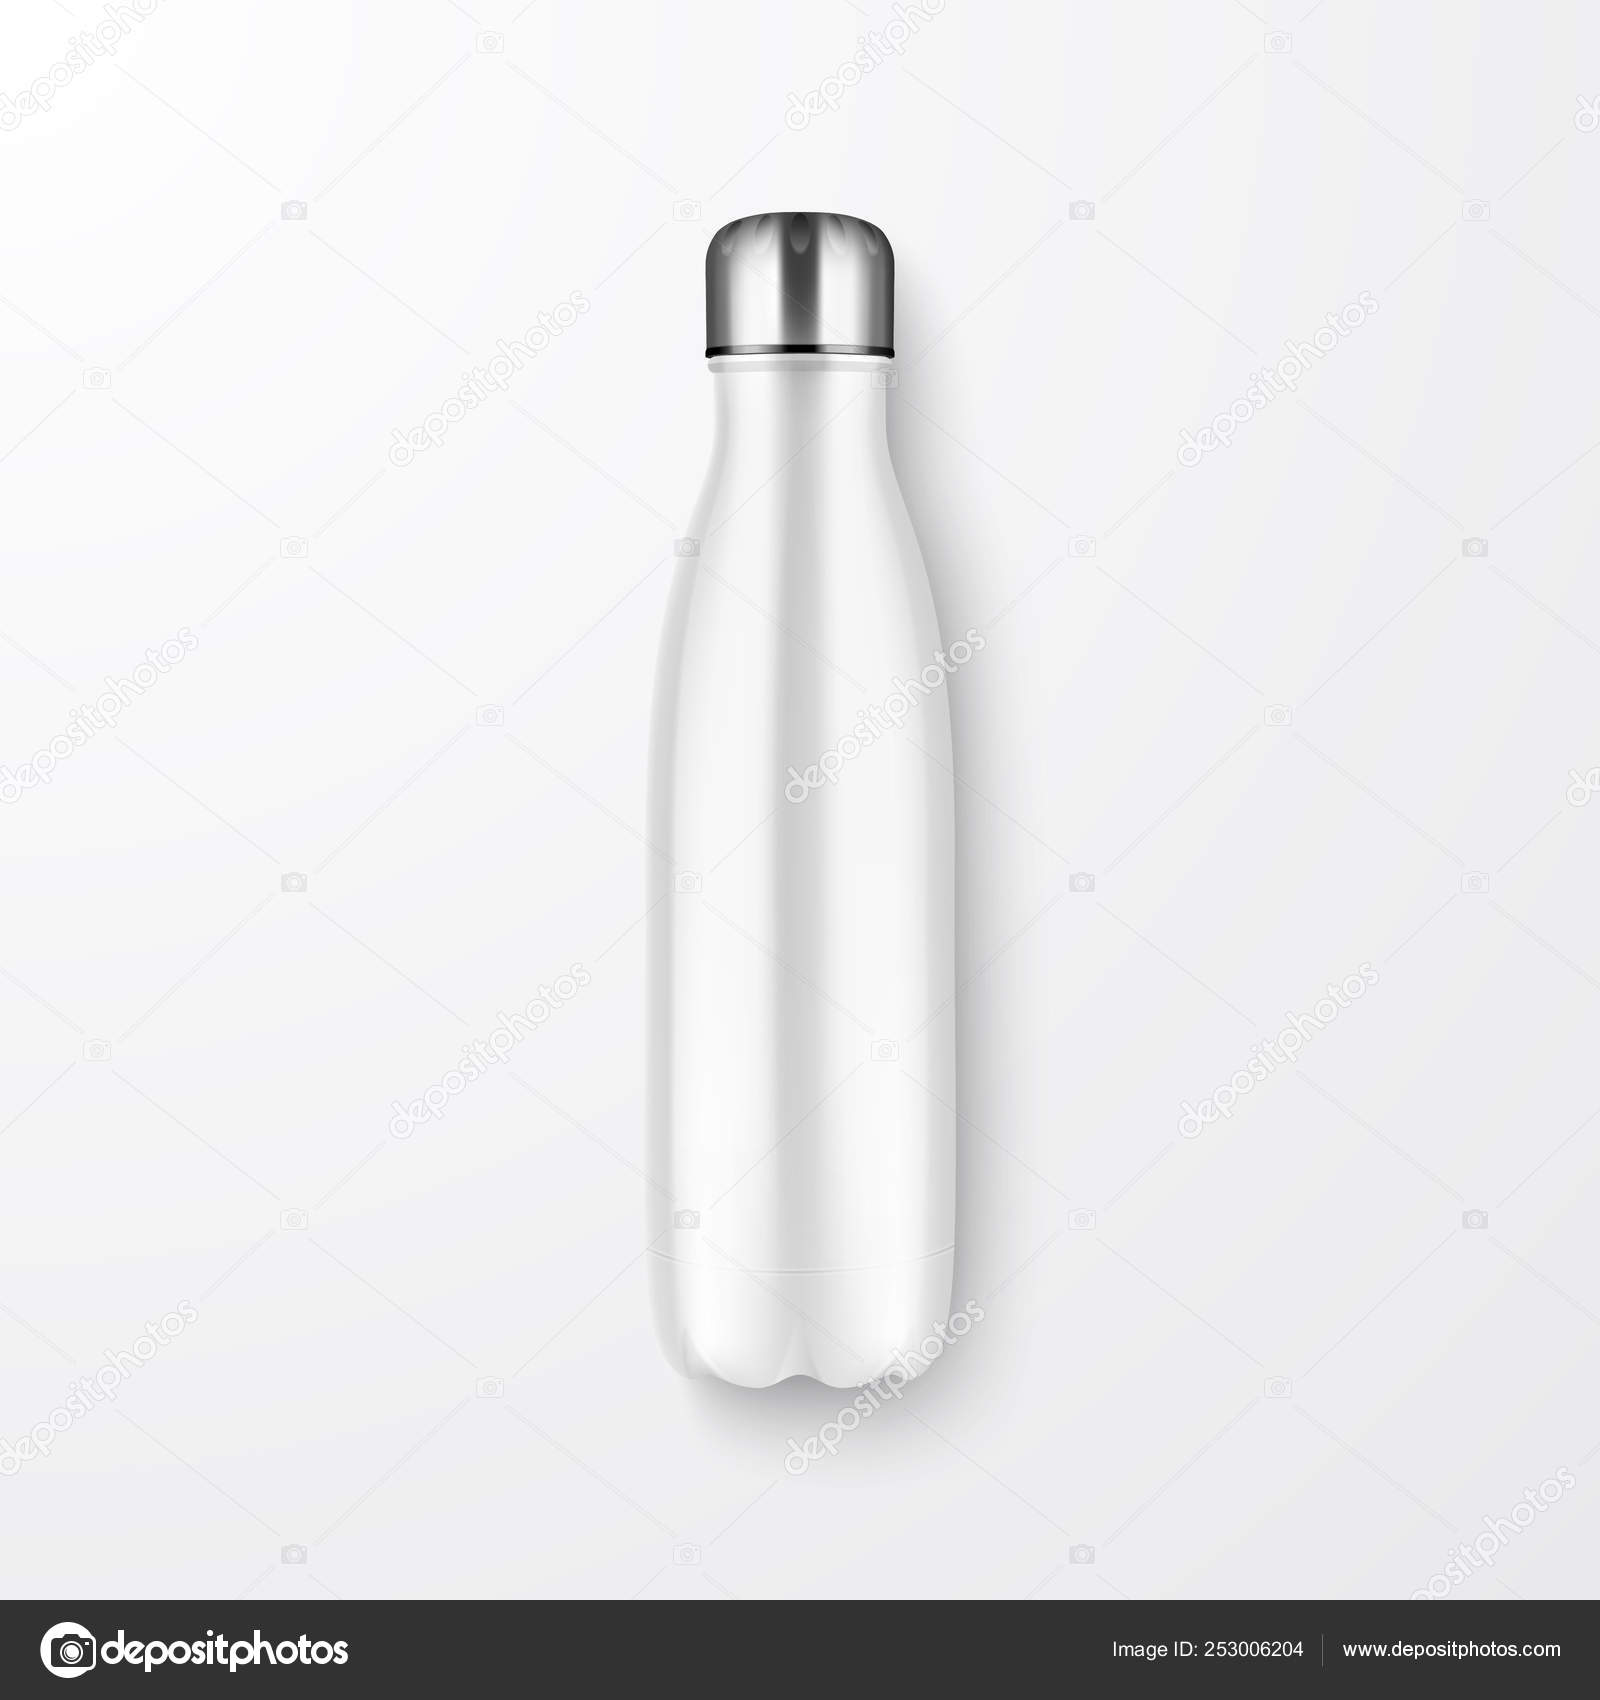 Download Vector Realistic 3d White Empty Glossy Metal Reusable Water Bottle With Silver Bung Closeup On White Background Design Template Of Packaging For Mock Up Package Advertising Logo Top View Vector Image